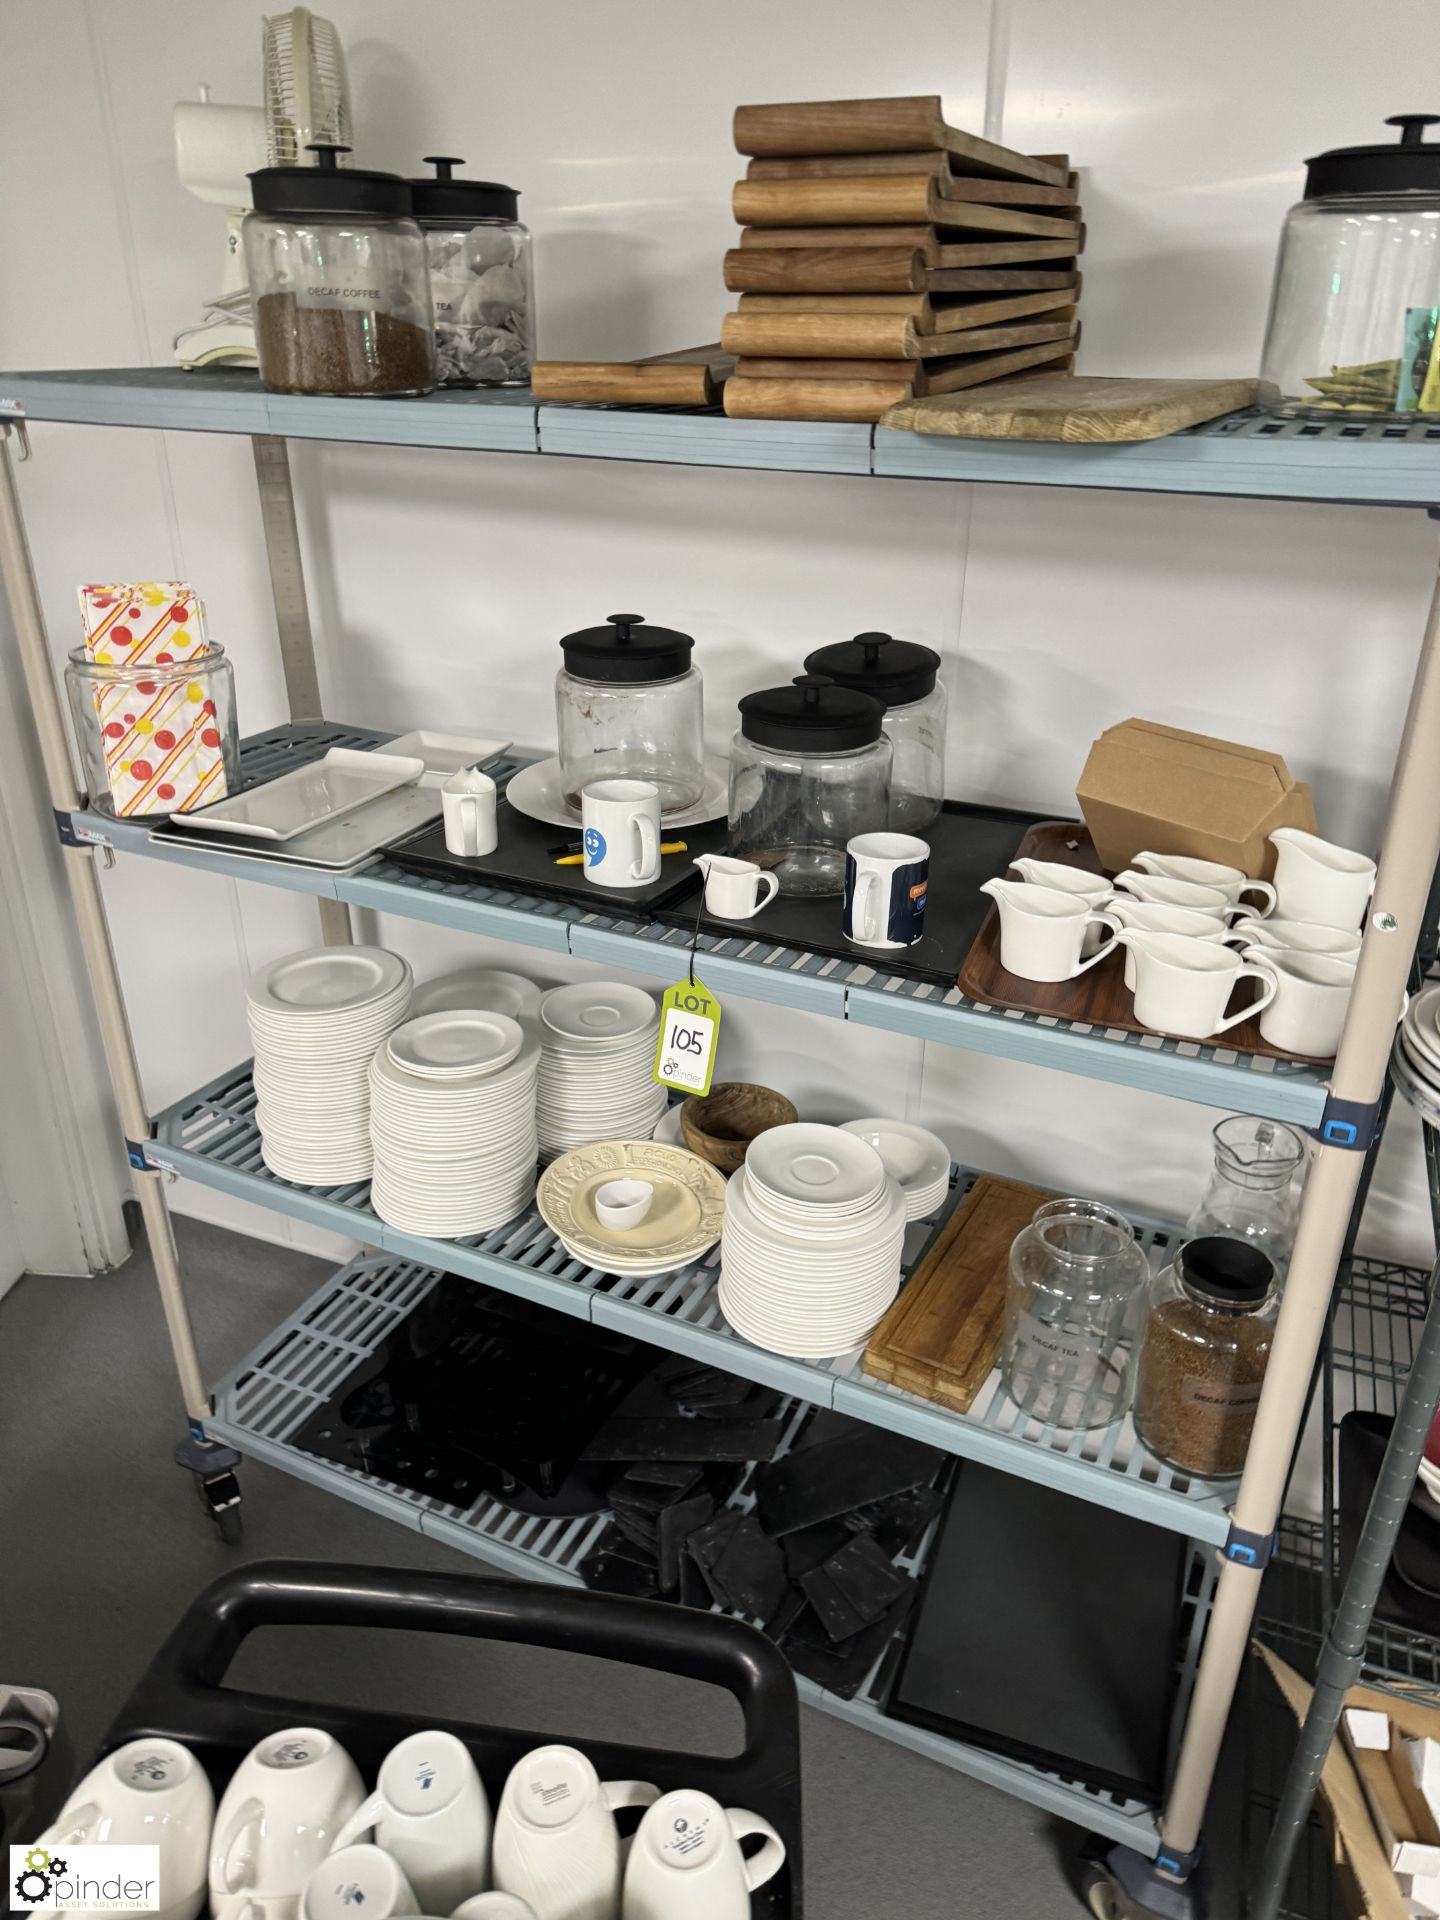 2 various Racks and Contents, including crockery, jars, etc (location in building – basement kitchen - Image 4 of 7